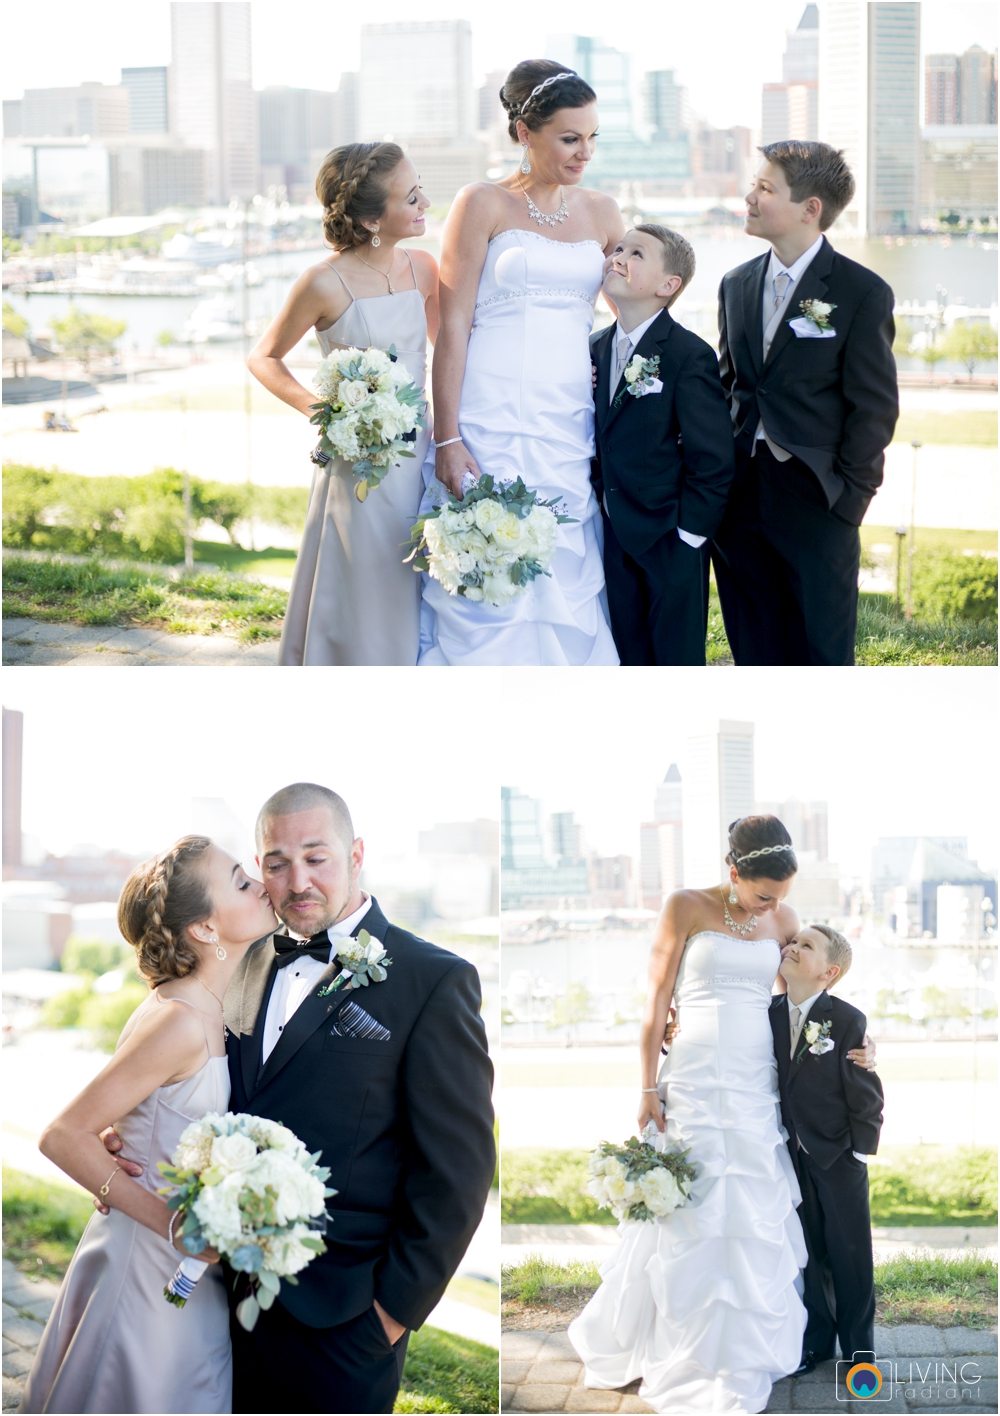 jessica-kevin-mcnally-AVAM-american-visionary-art-museum-downtown-federal-hill-baltimore-inner-harbor-wedding-living-radiant-photography-maggie-patrick-nolan_0038.jpg